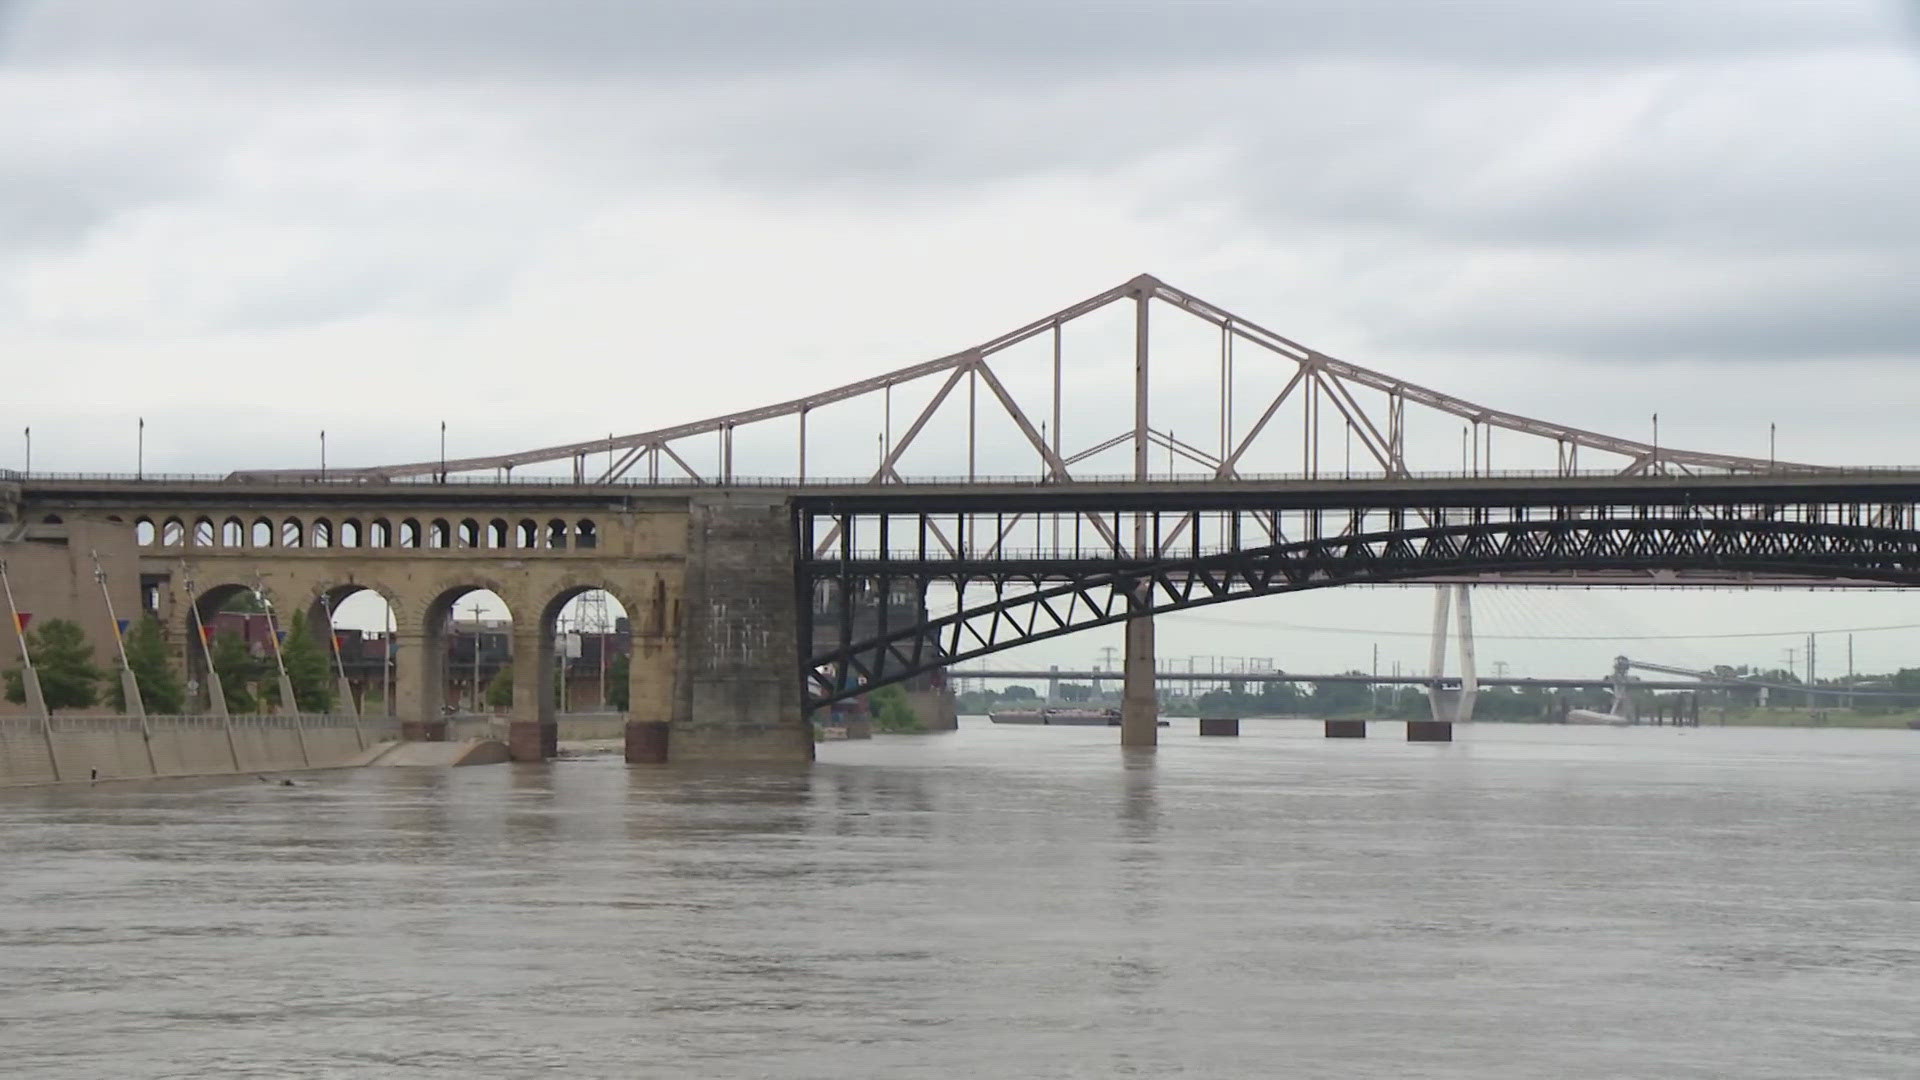 Wednesday is not only America's Birthday. It's also the day the Eads Bridge officially opened 150 years ago.